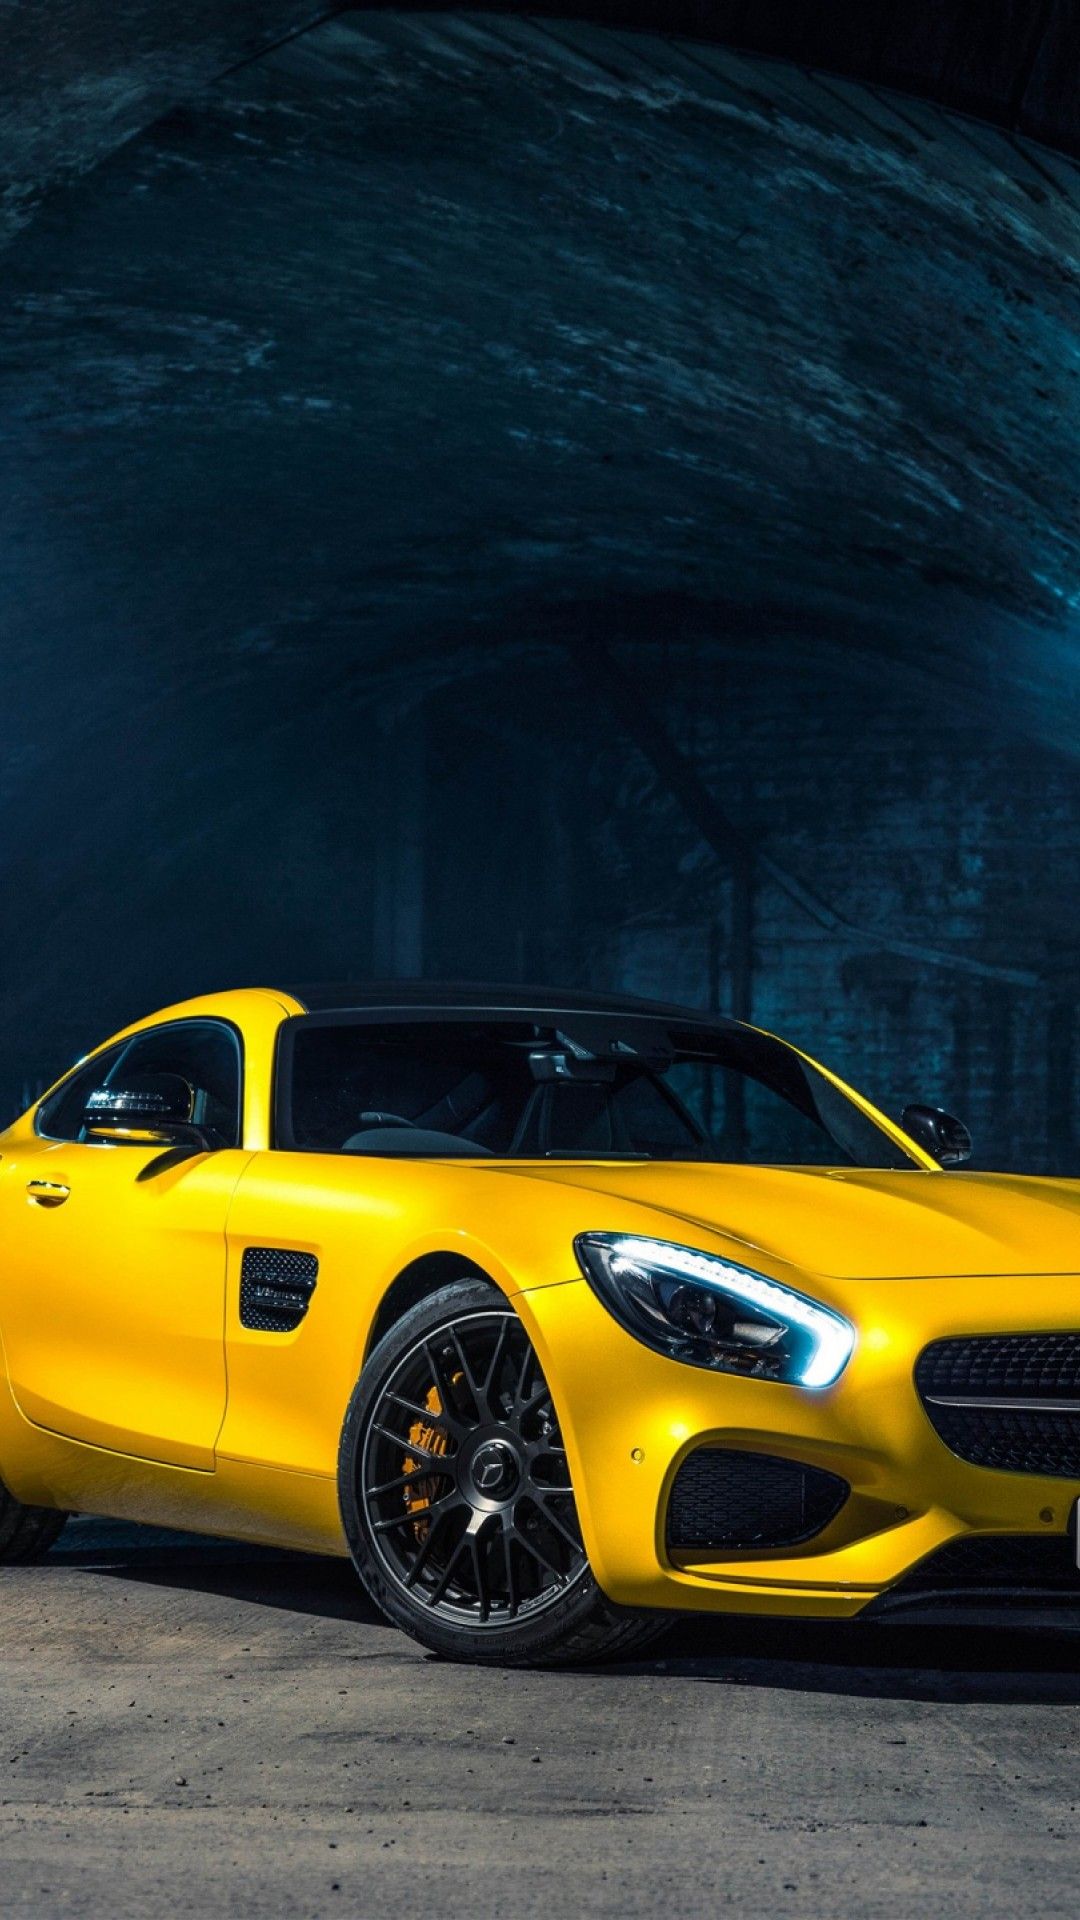 Mercedes Benz Amg Gt S Wallpaper for Desktop and Mobiles iPhone 6 / 6S Plus